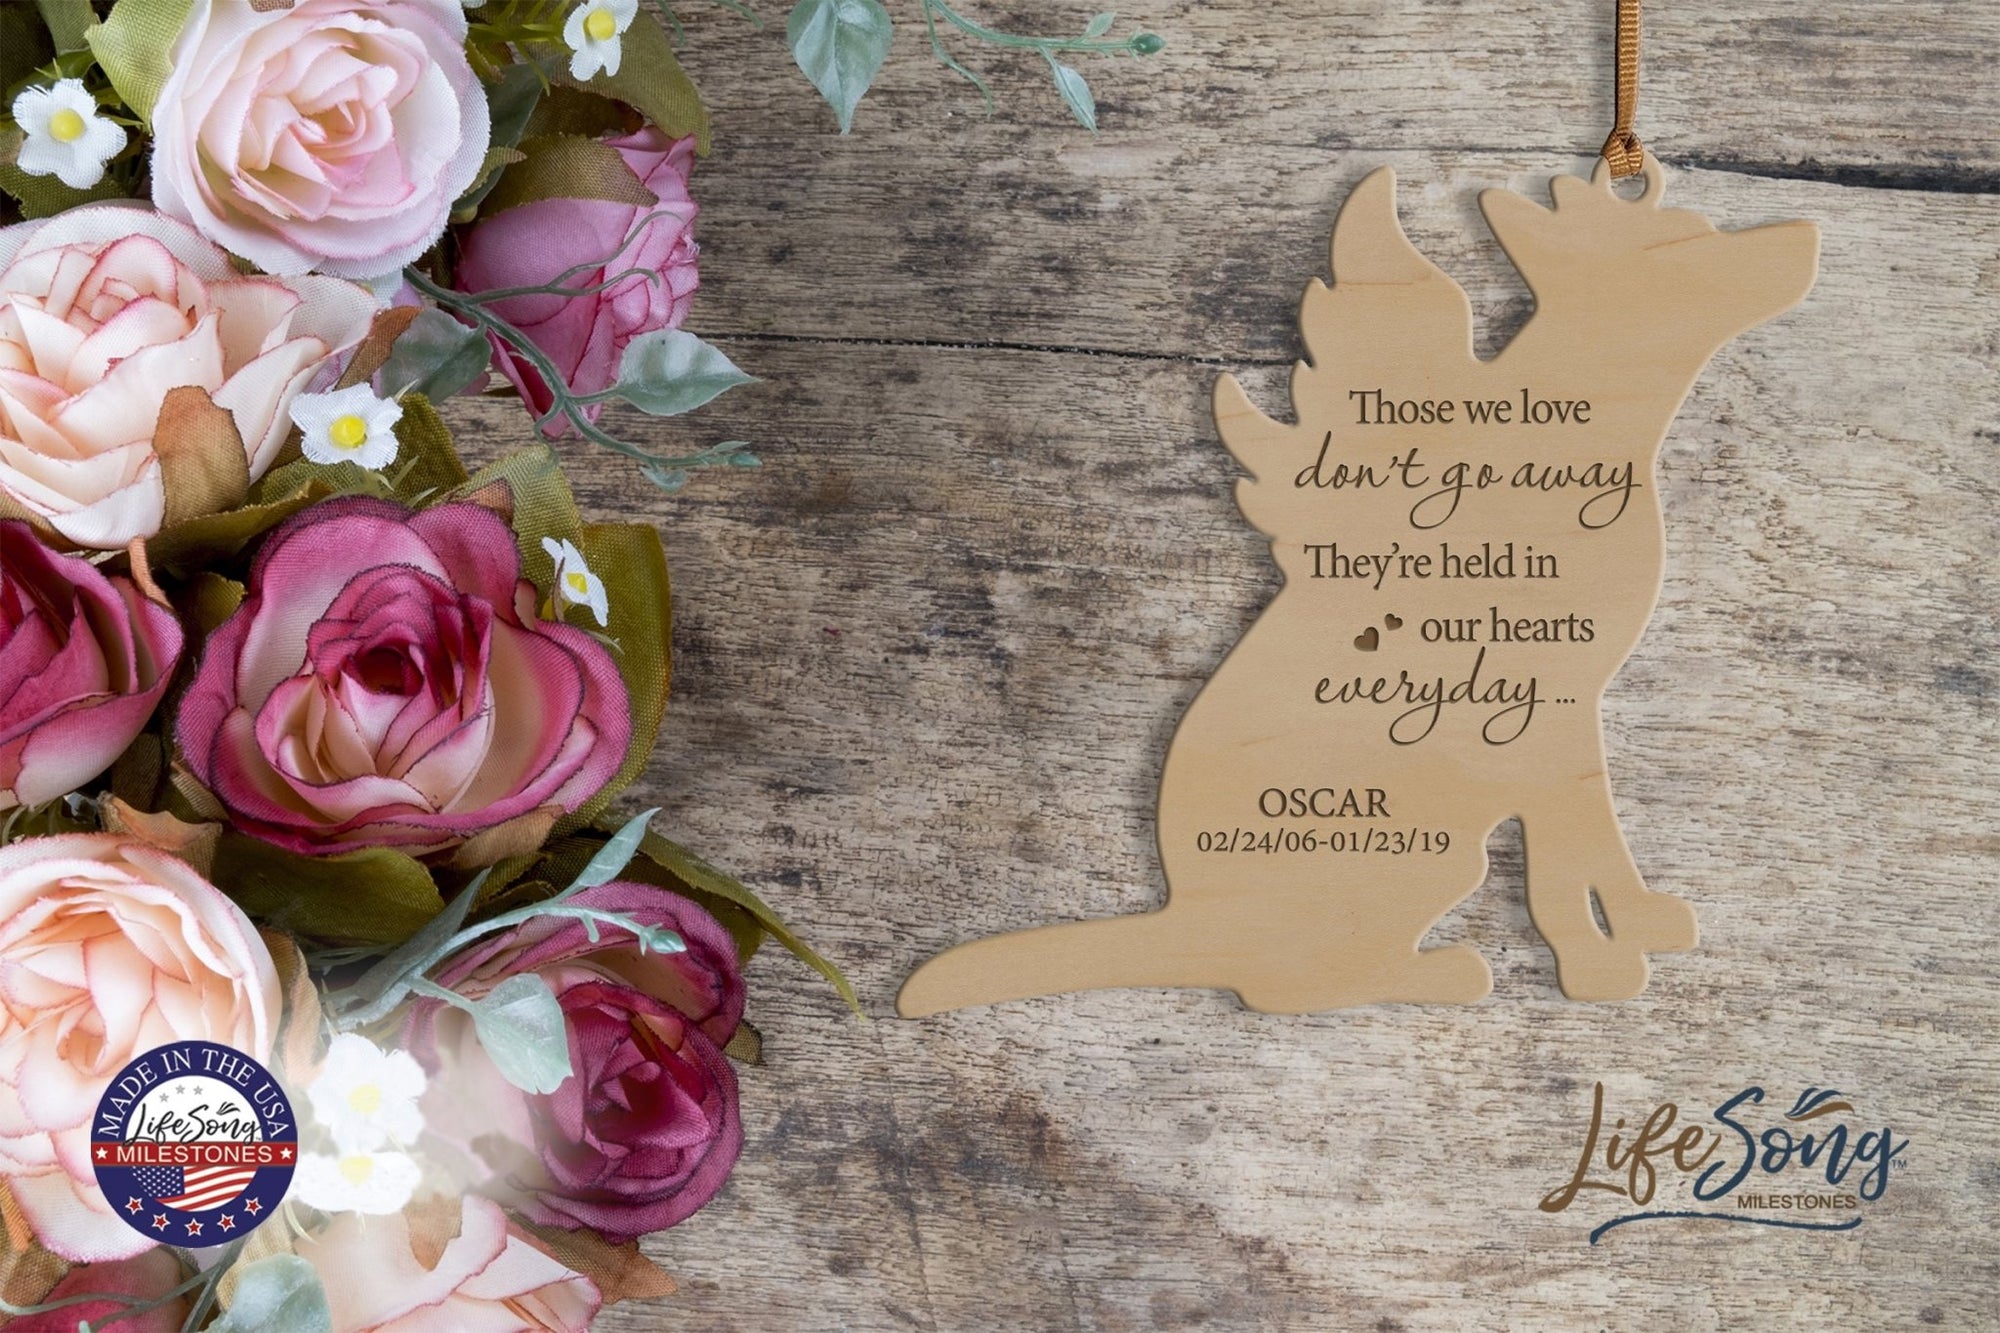 Personalized Engraved Memorial Dog Ornament 4.9375” x 5.375” x 0.125” - Those we love don’t go away (HEARTS) - LifeSong Milestones